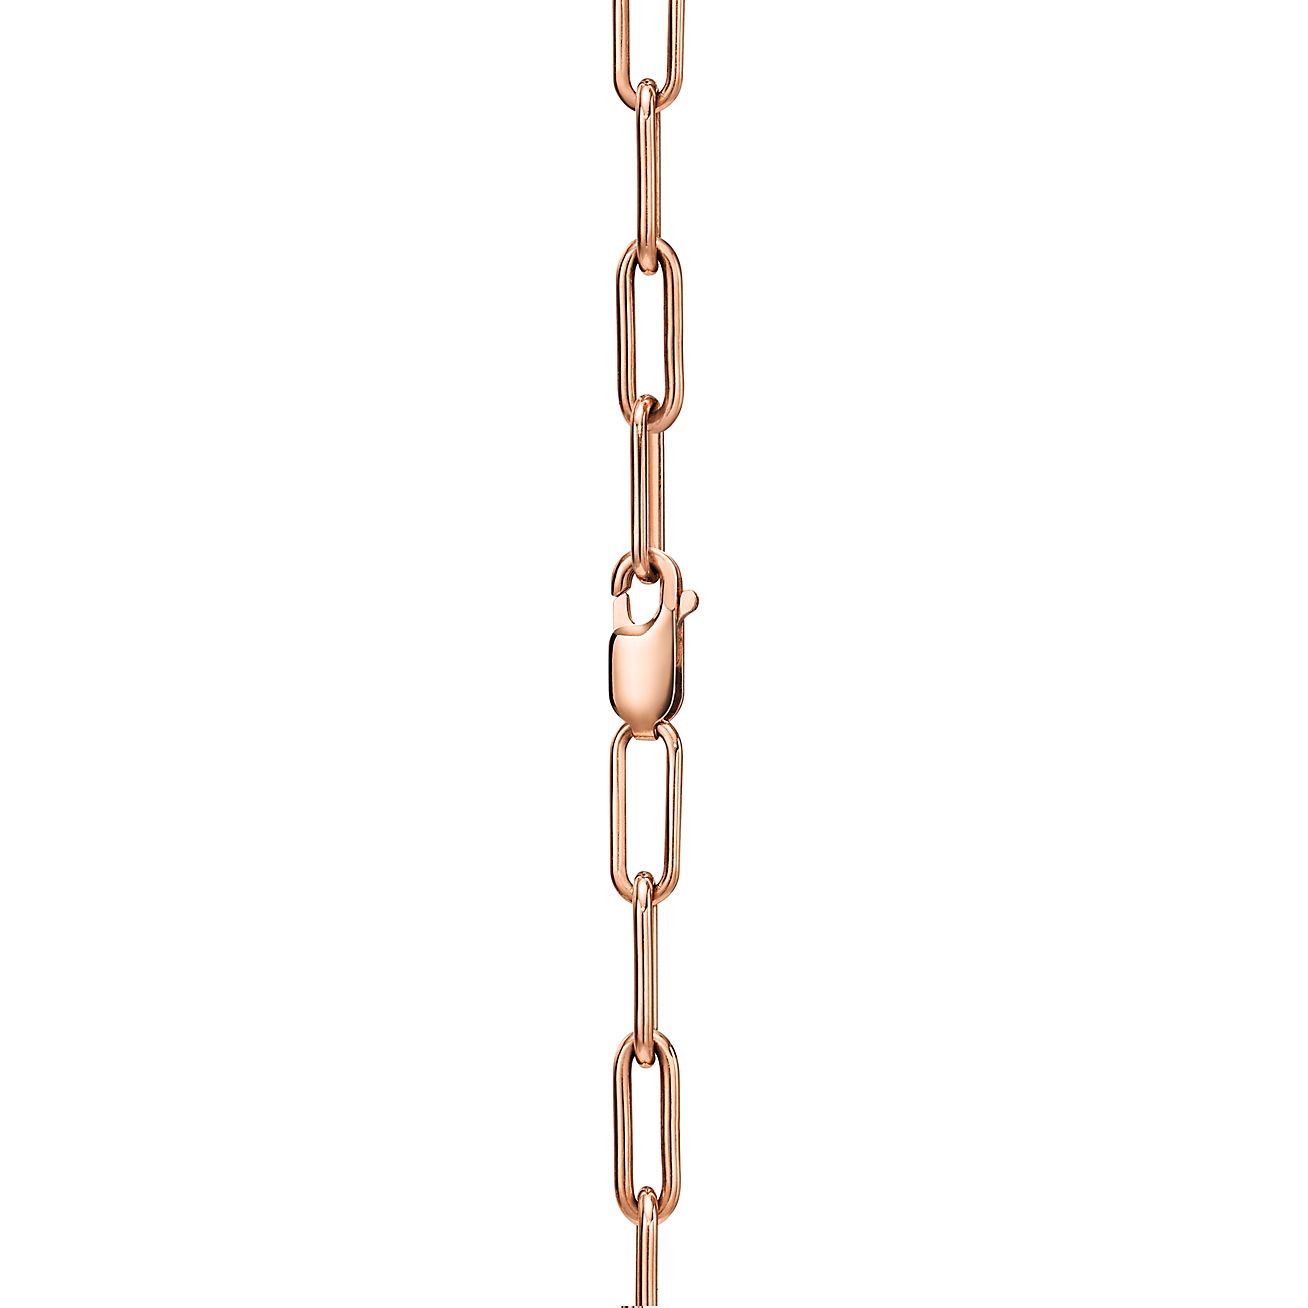 Tiffany Lock Pendant in Rose and White Gold with Diamonds, Extra Large